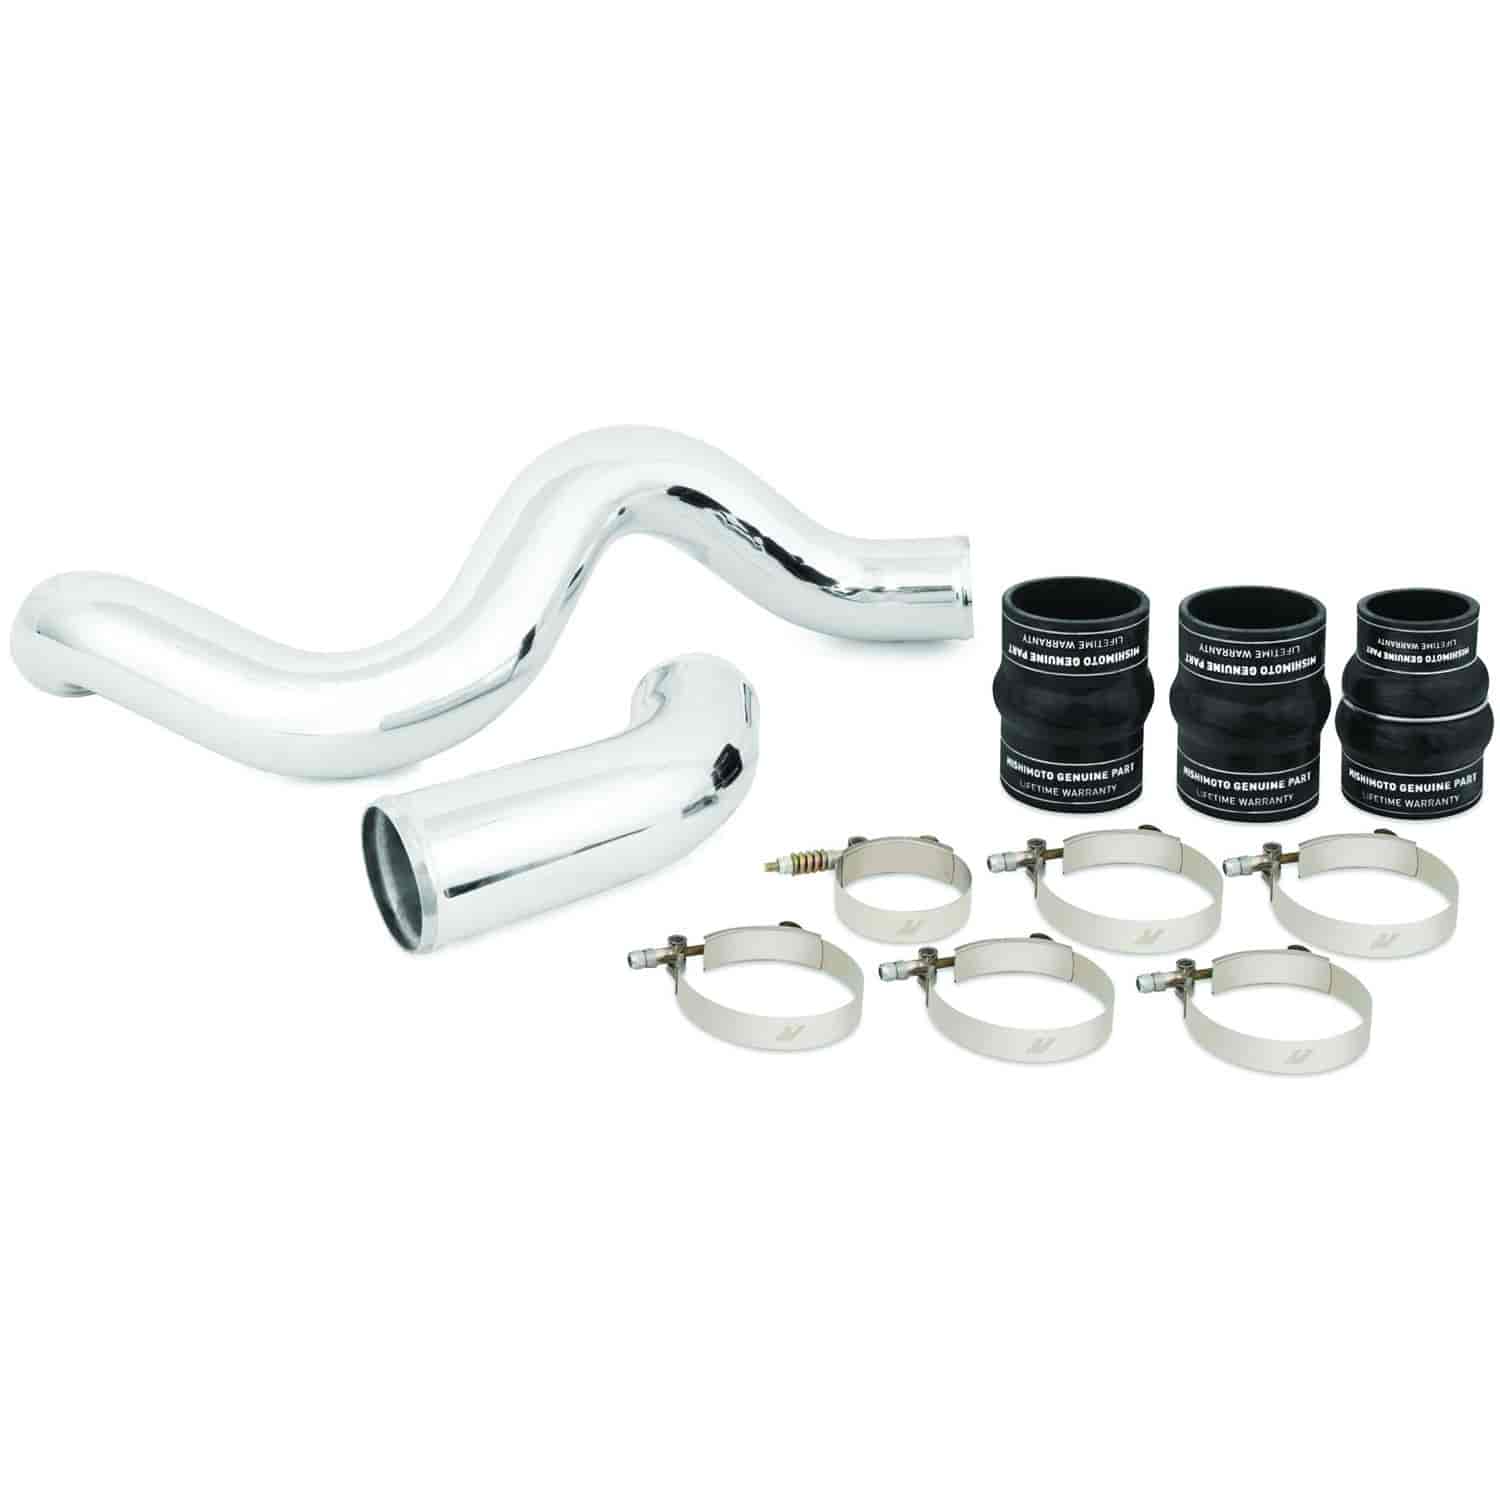 Chevrolet/GMC 6.6L Duramax Hot-Side Intercooler Pipe and Boot Kit - MFG Part No. MMICP-DMAX-11HBK